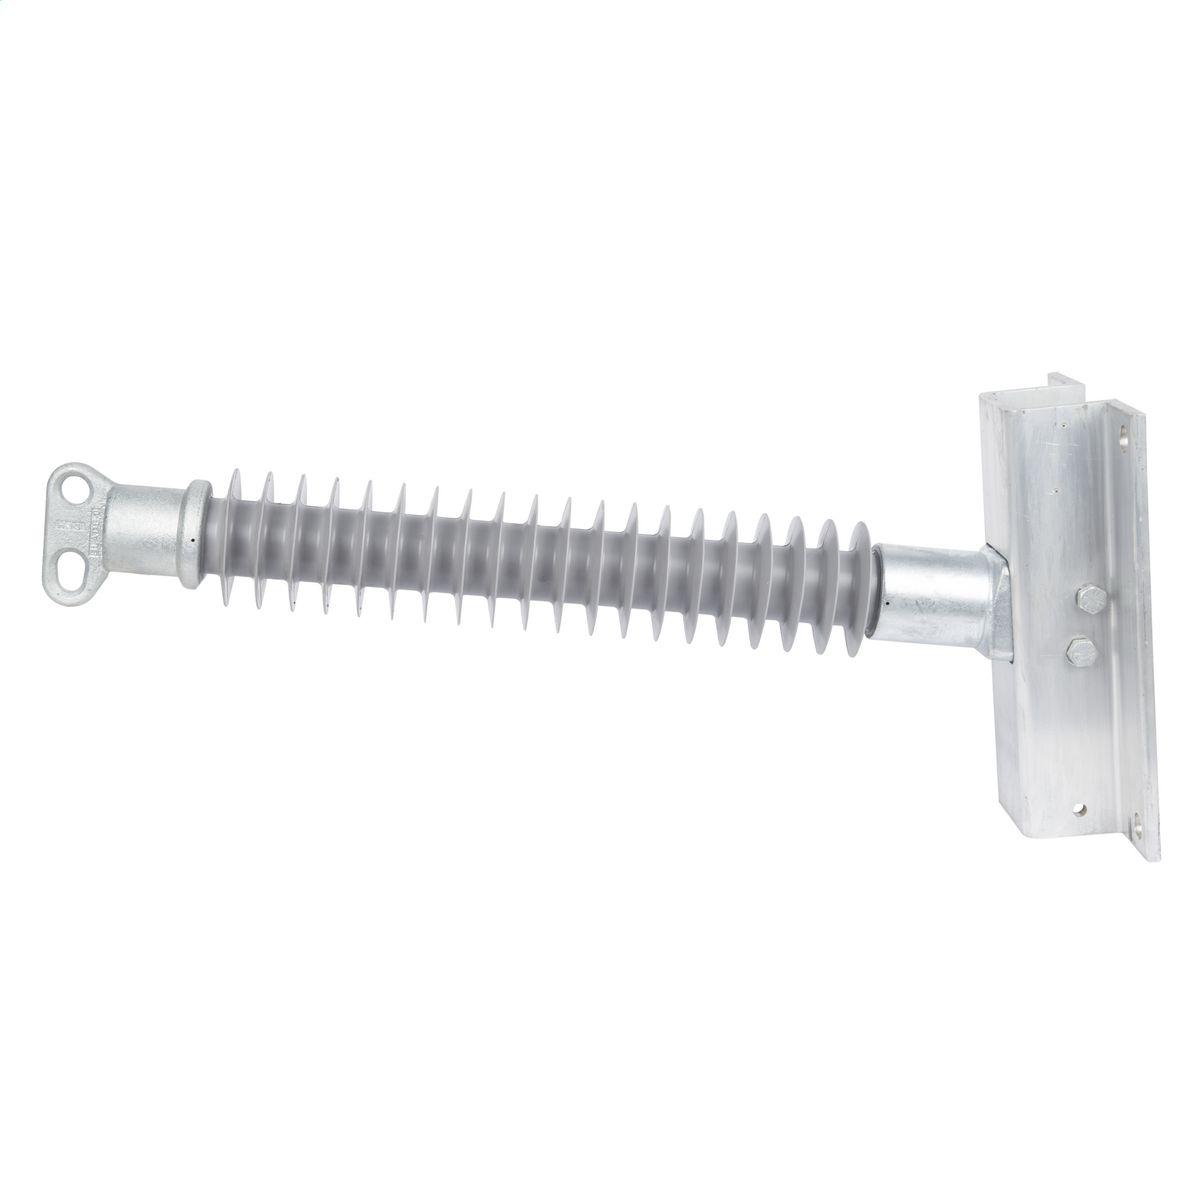 Hubbell P300058S0030 3.0" Line Post, 2 hole blade, Aluminum Flat base9x13 7/8" bolts  ; Made from hydrophobic silicone polymer ; 